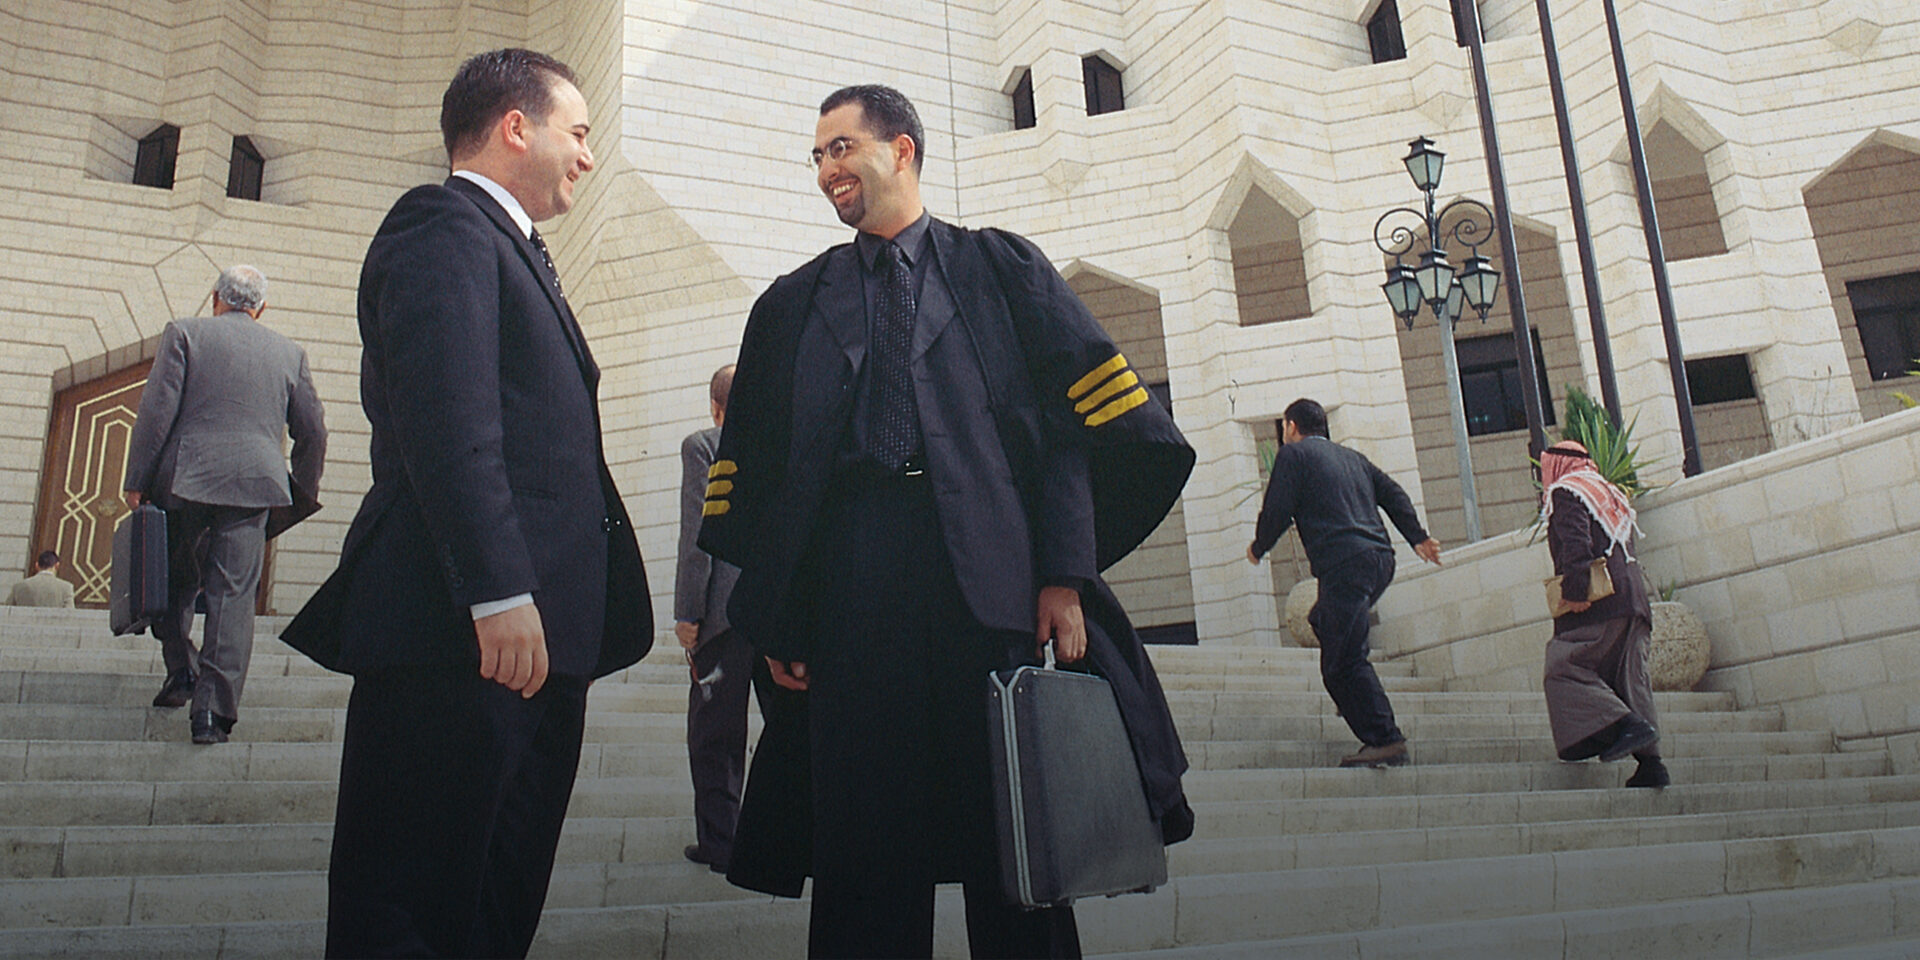 A judge speaking with a man in a suit on the steps of a large building.